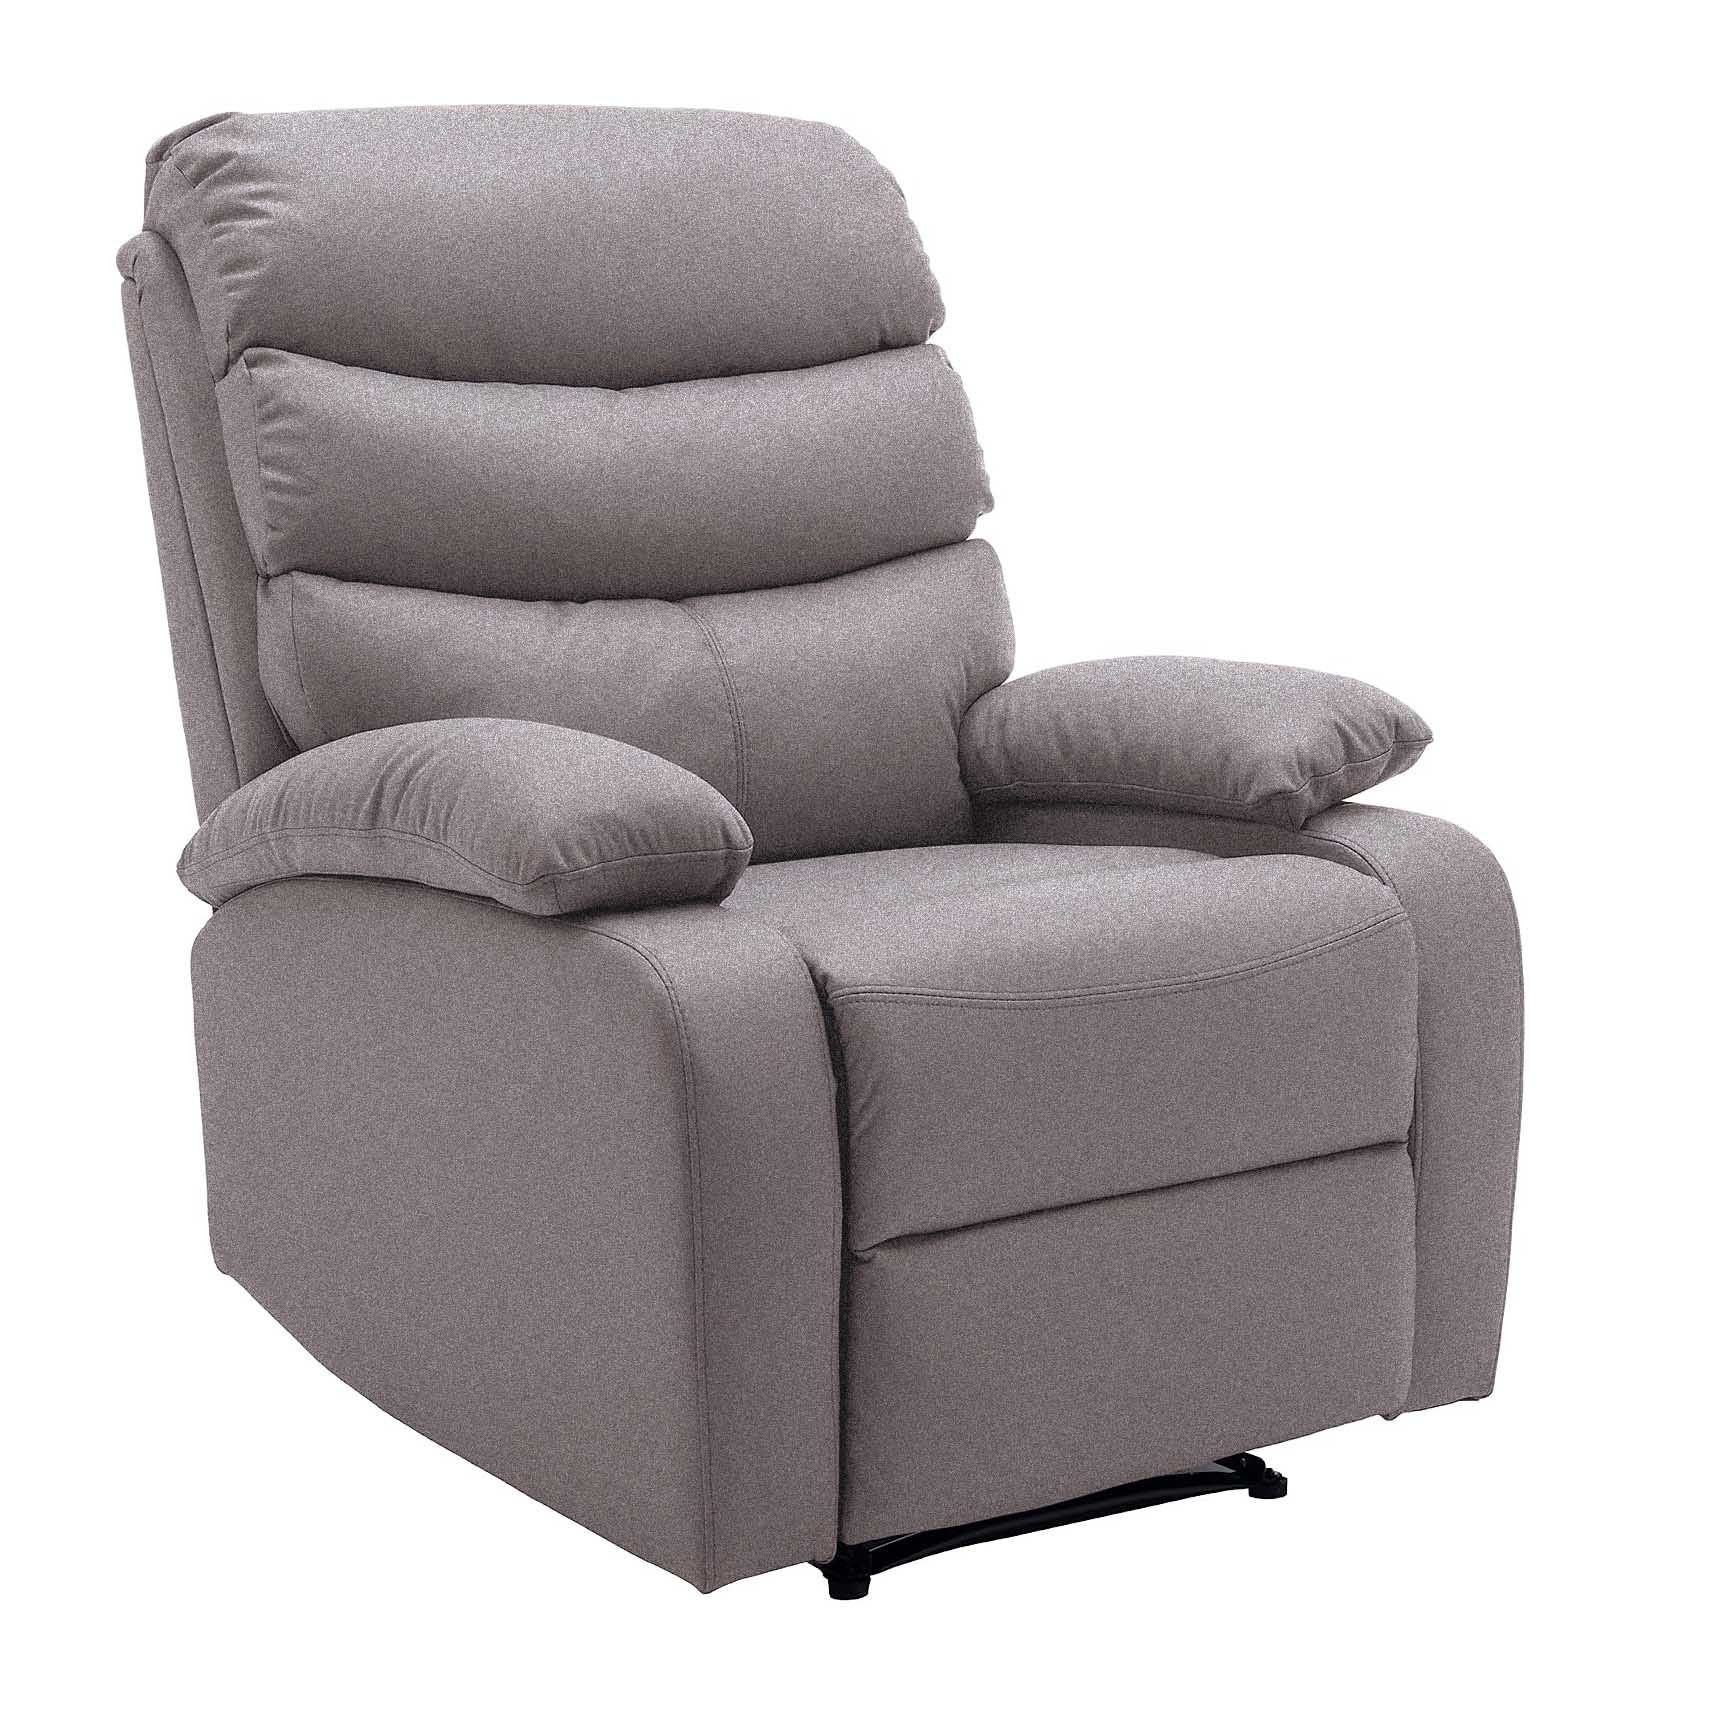 Fauteuil inclinable manuel Miami 1 place marron